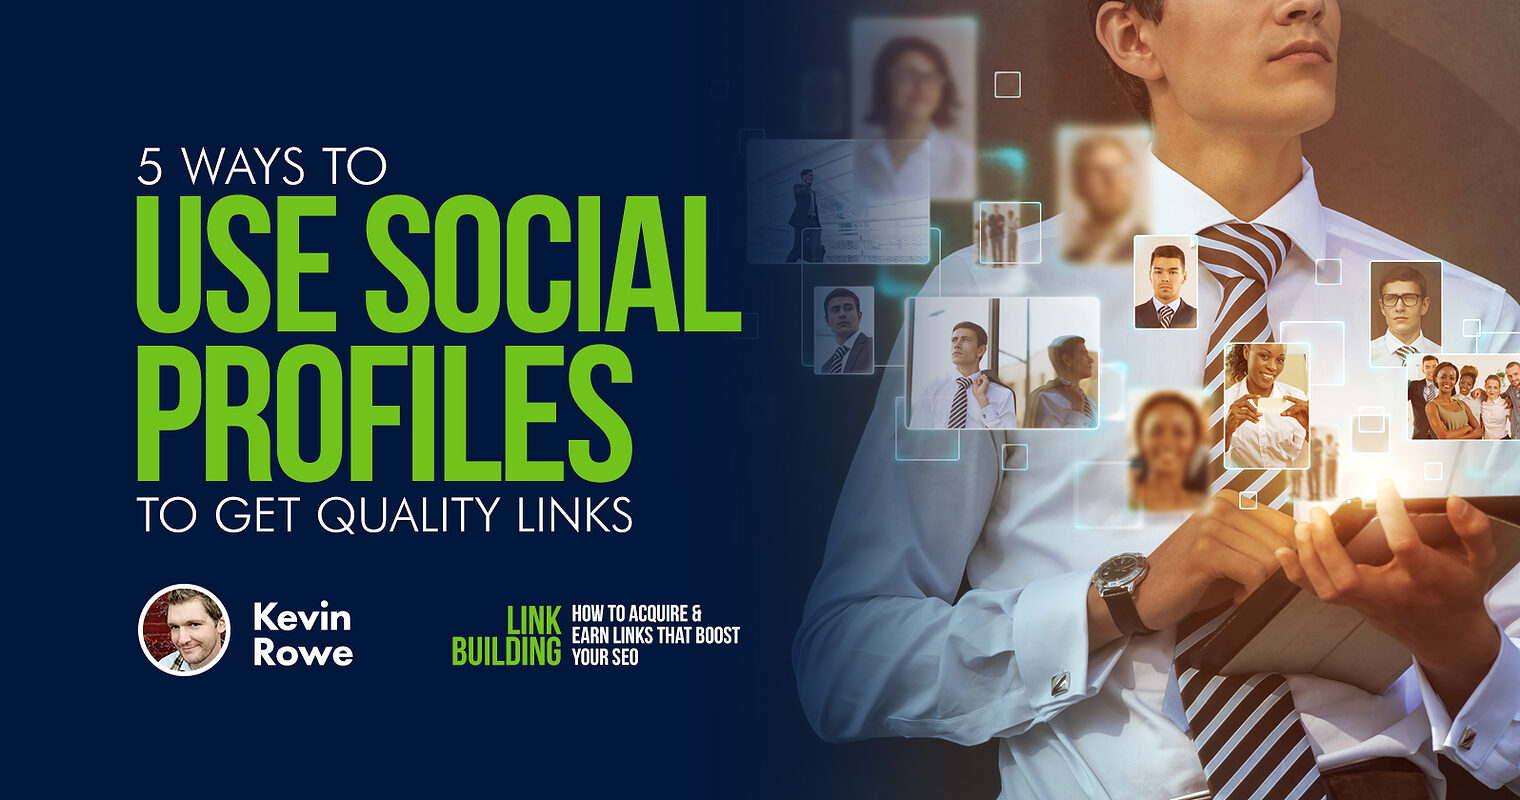 5 Ways to Use Social Profiles to Get Quality Links